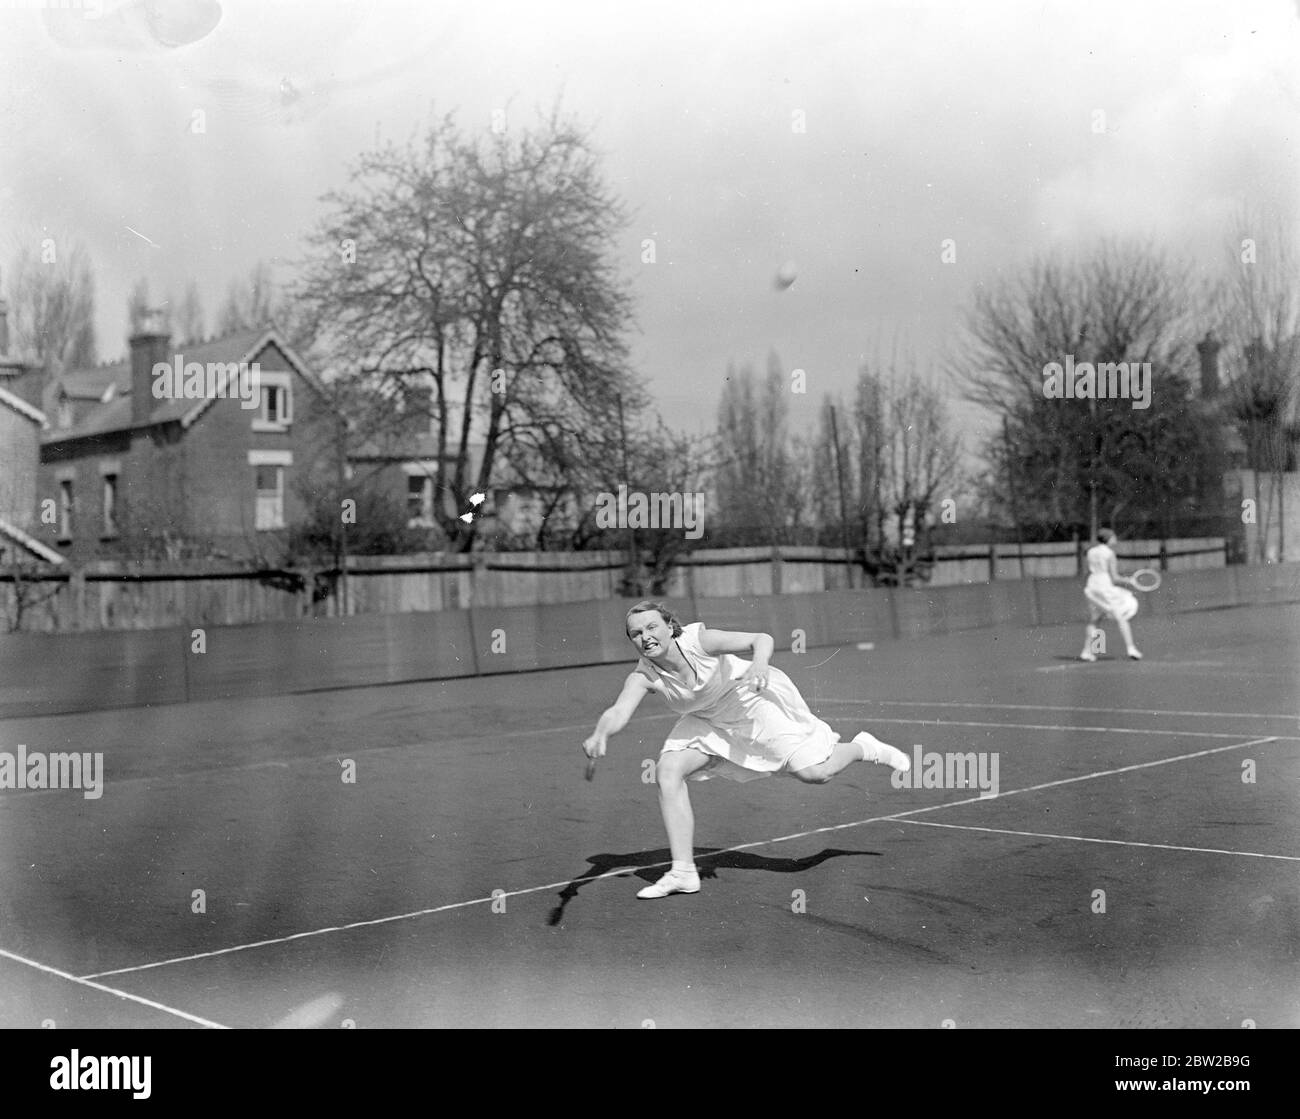 Tennis intense au tournoi Westside Country Club. Mlle O'Connell. 21 avril 1932 Banque D'Images